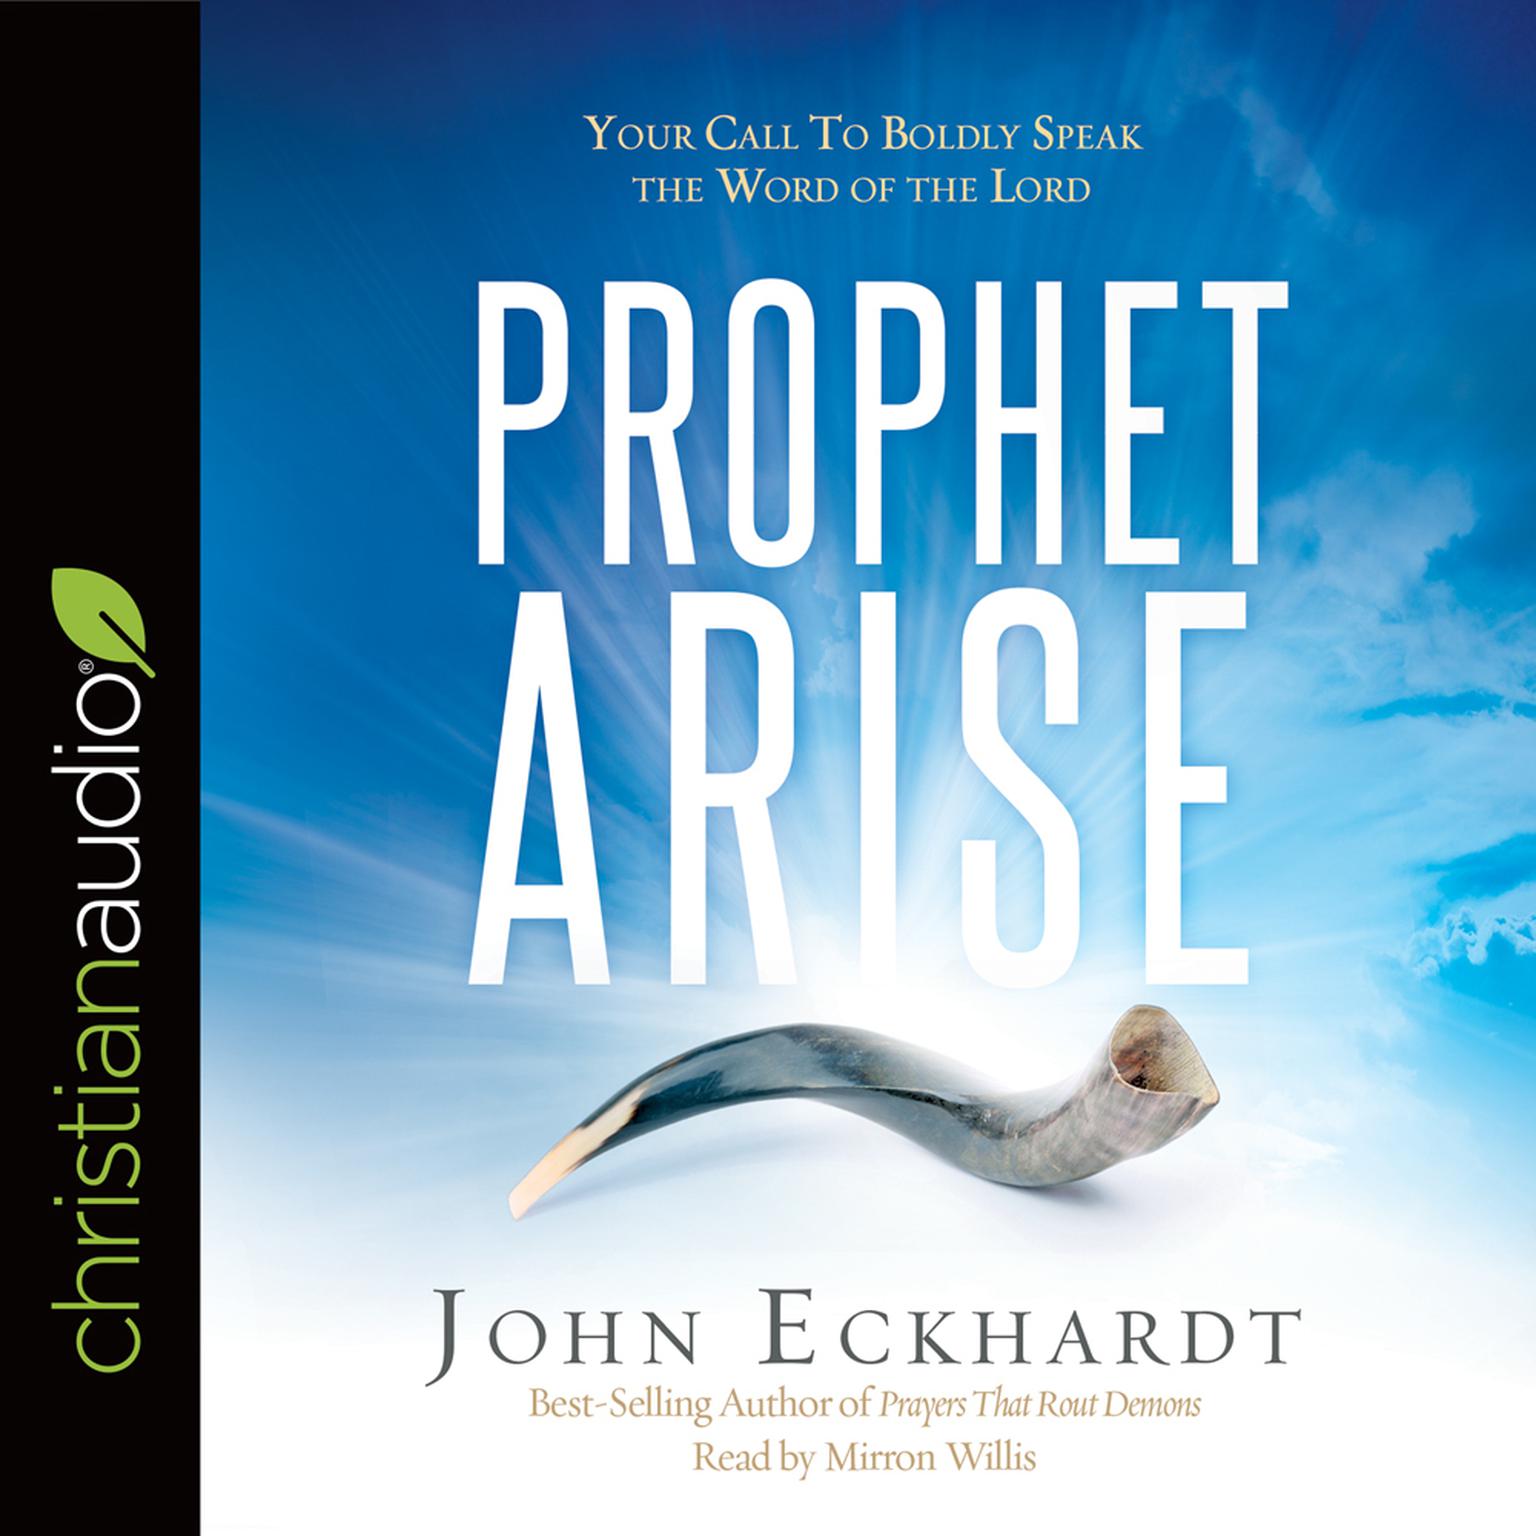 Prophet, Arise: Your Call to Boldly Speak the Word of the Lord Audiobook, by John Eckhardt